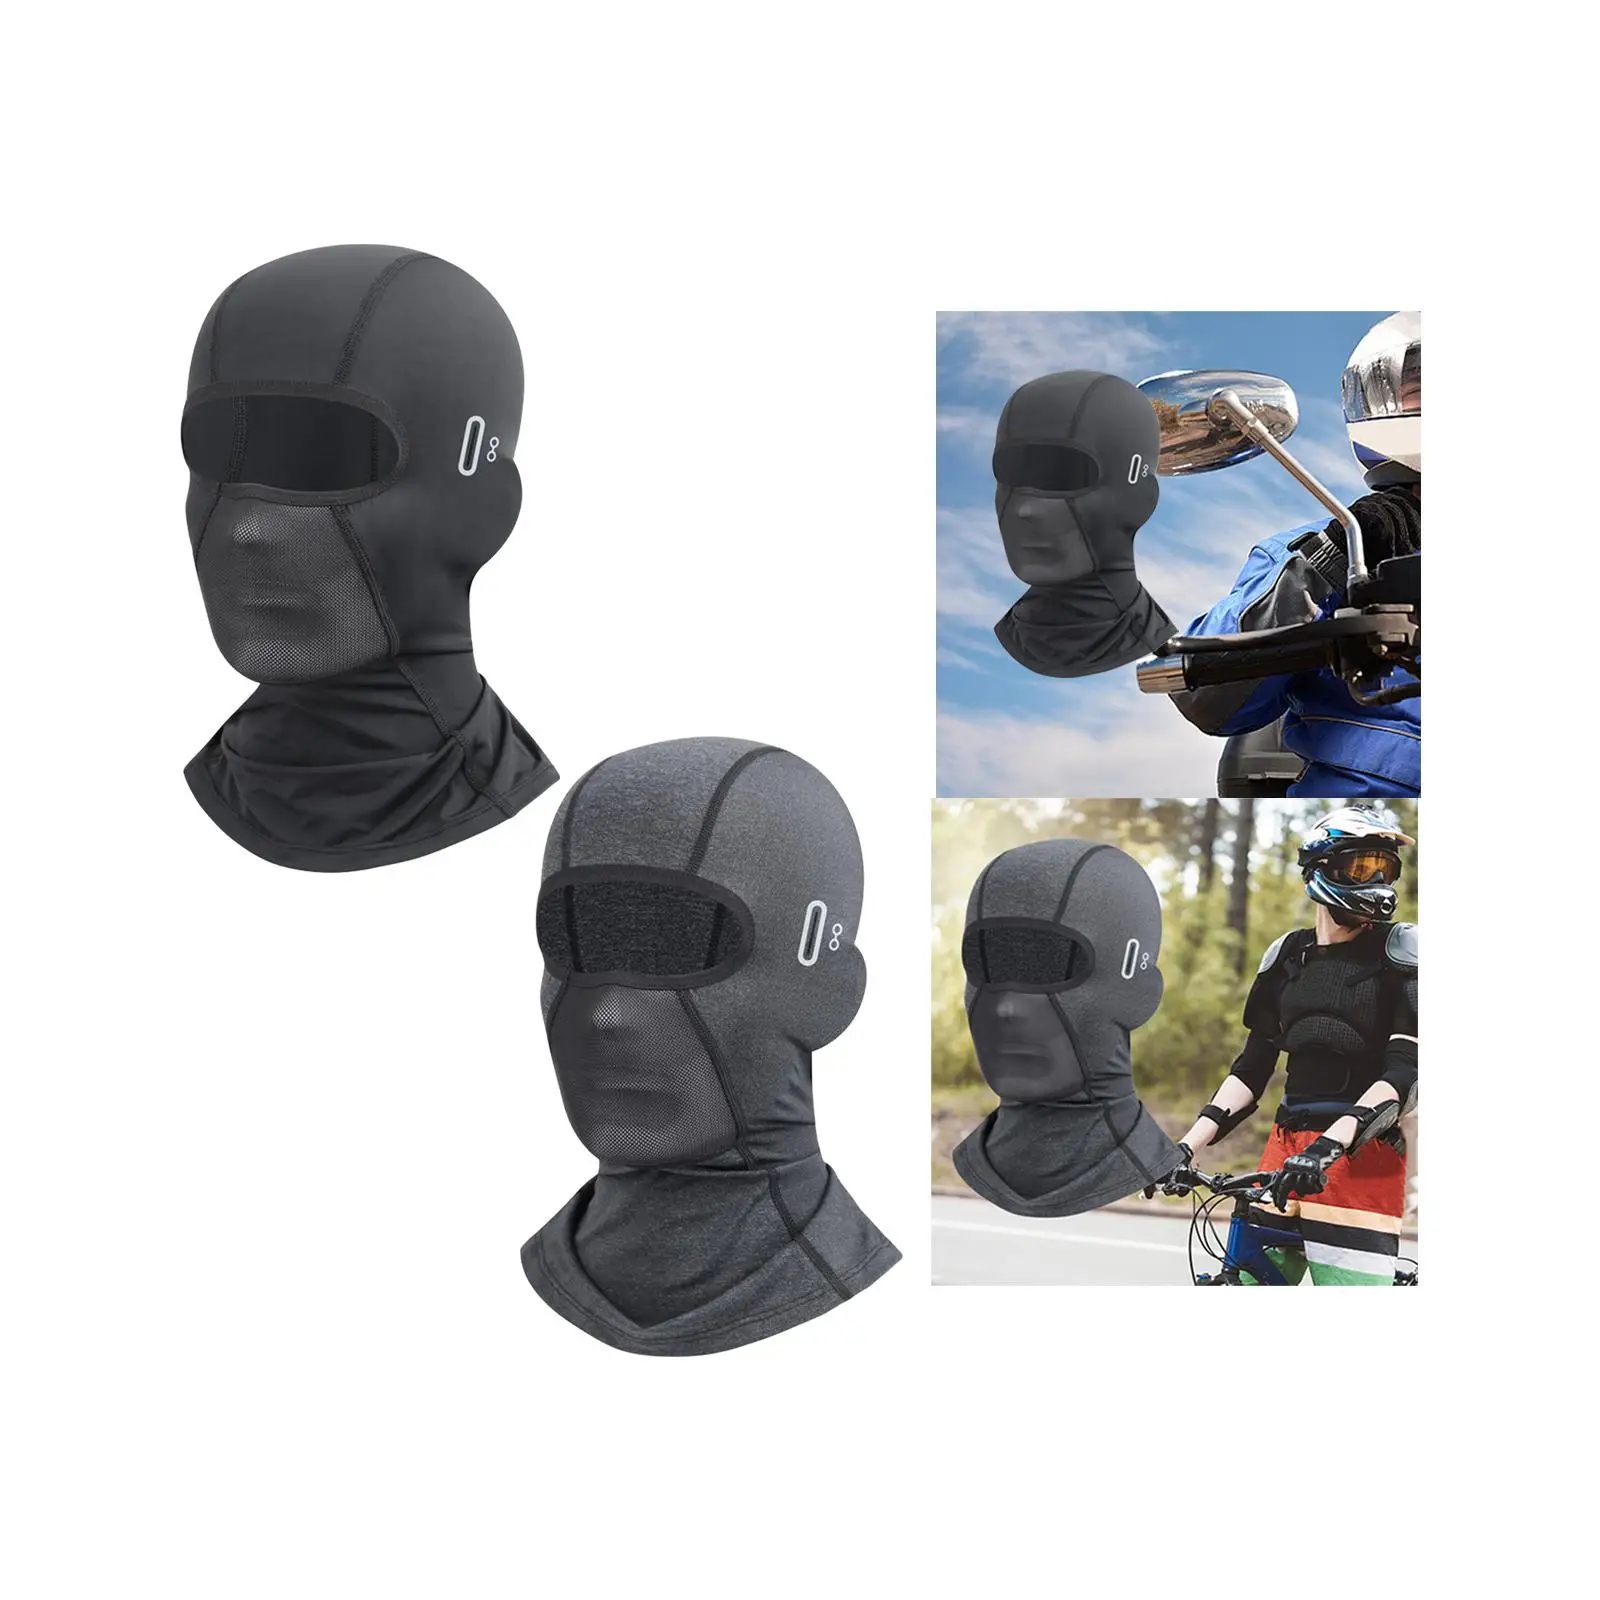 Balaclava Face Mask Summer Cooling Motorcycle Scarf Ski Mask Neck Warmer for Outdoor Riding Ski Snowboarding Motorcycle Cycling